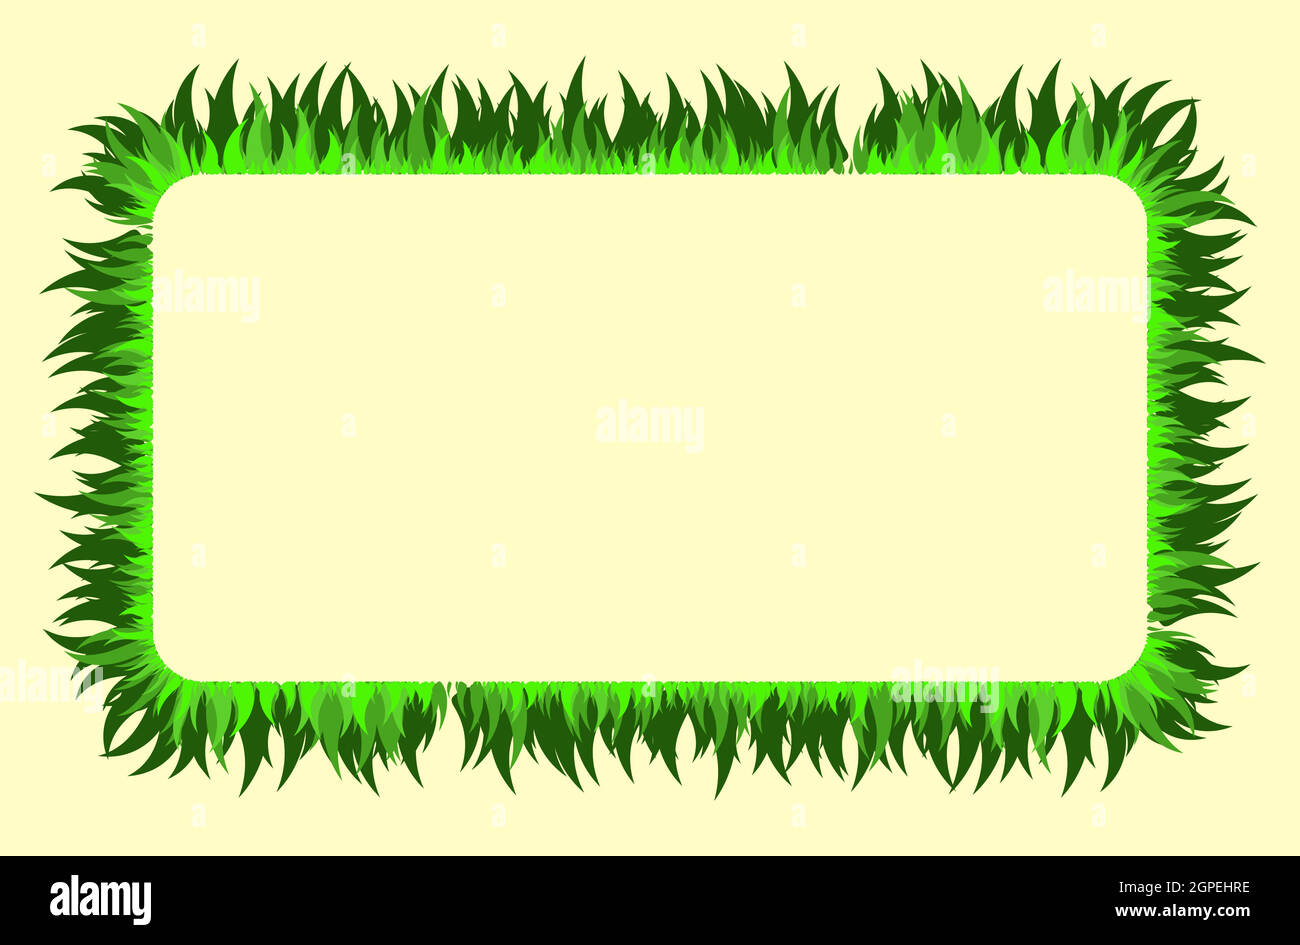 Grass rectangle frame with copy space. Lawn border with green foliage blades design. Vector background illustration. Stock Vector